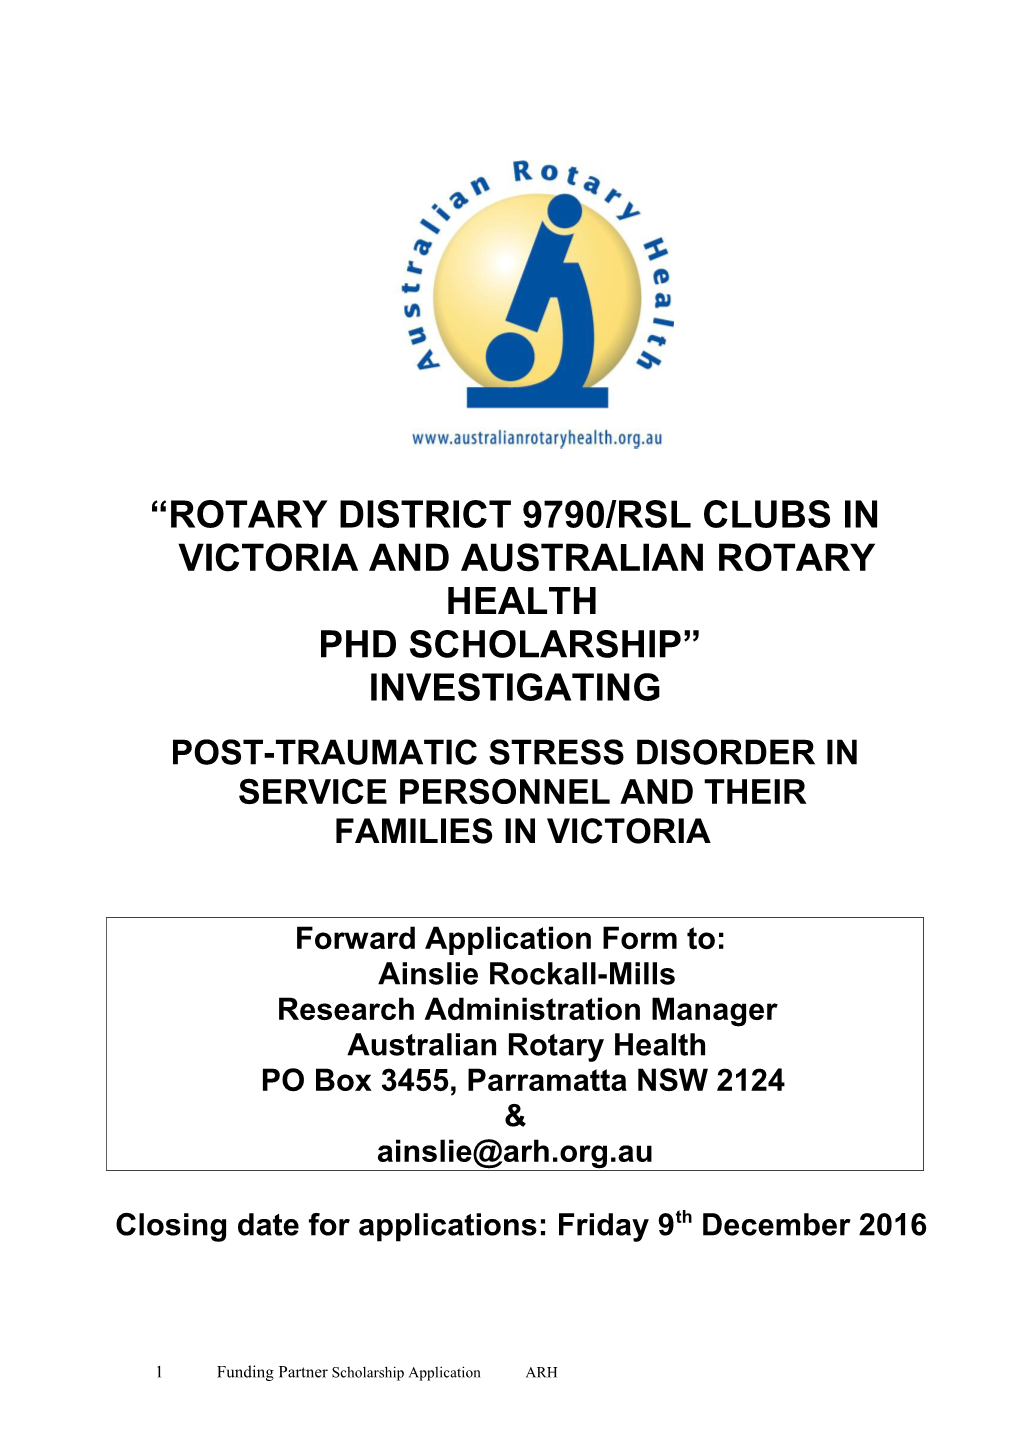 Rotary District 9790/Rsl Clubs in Victoria and Australian Rotary Health